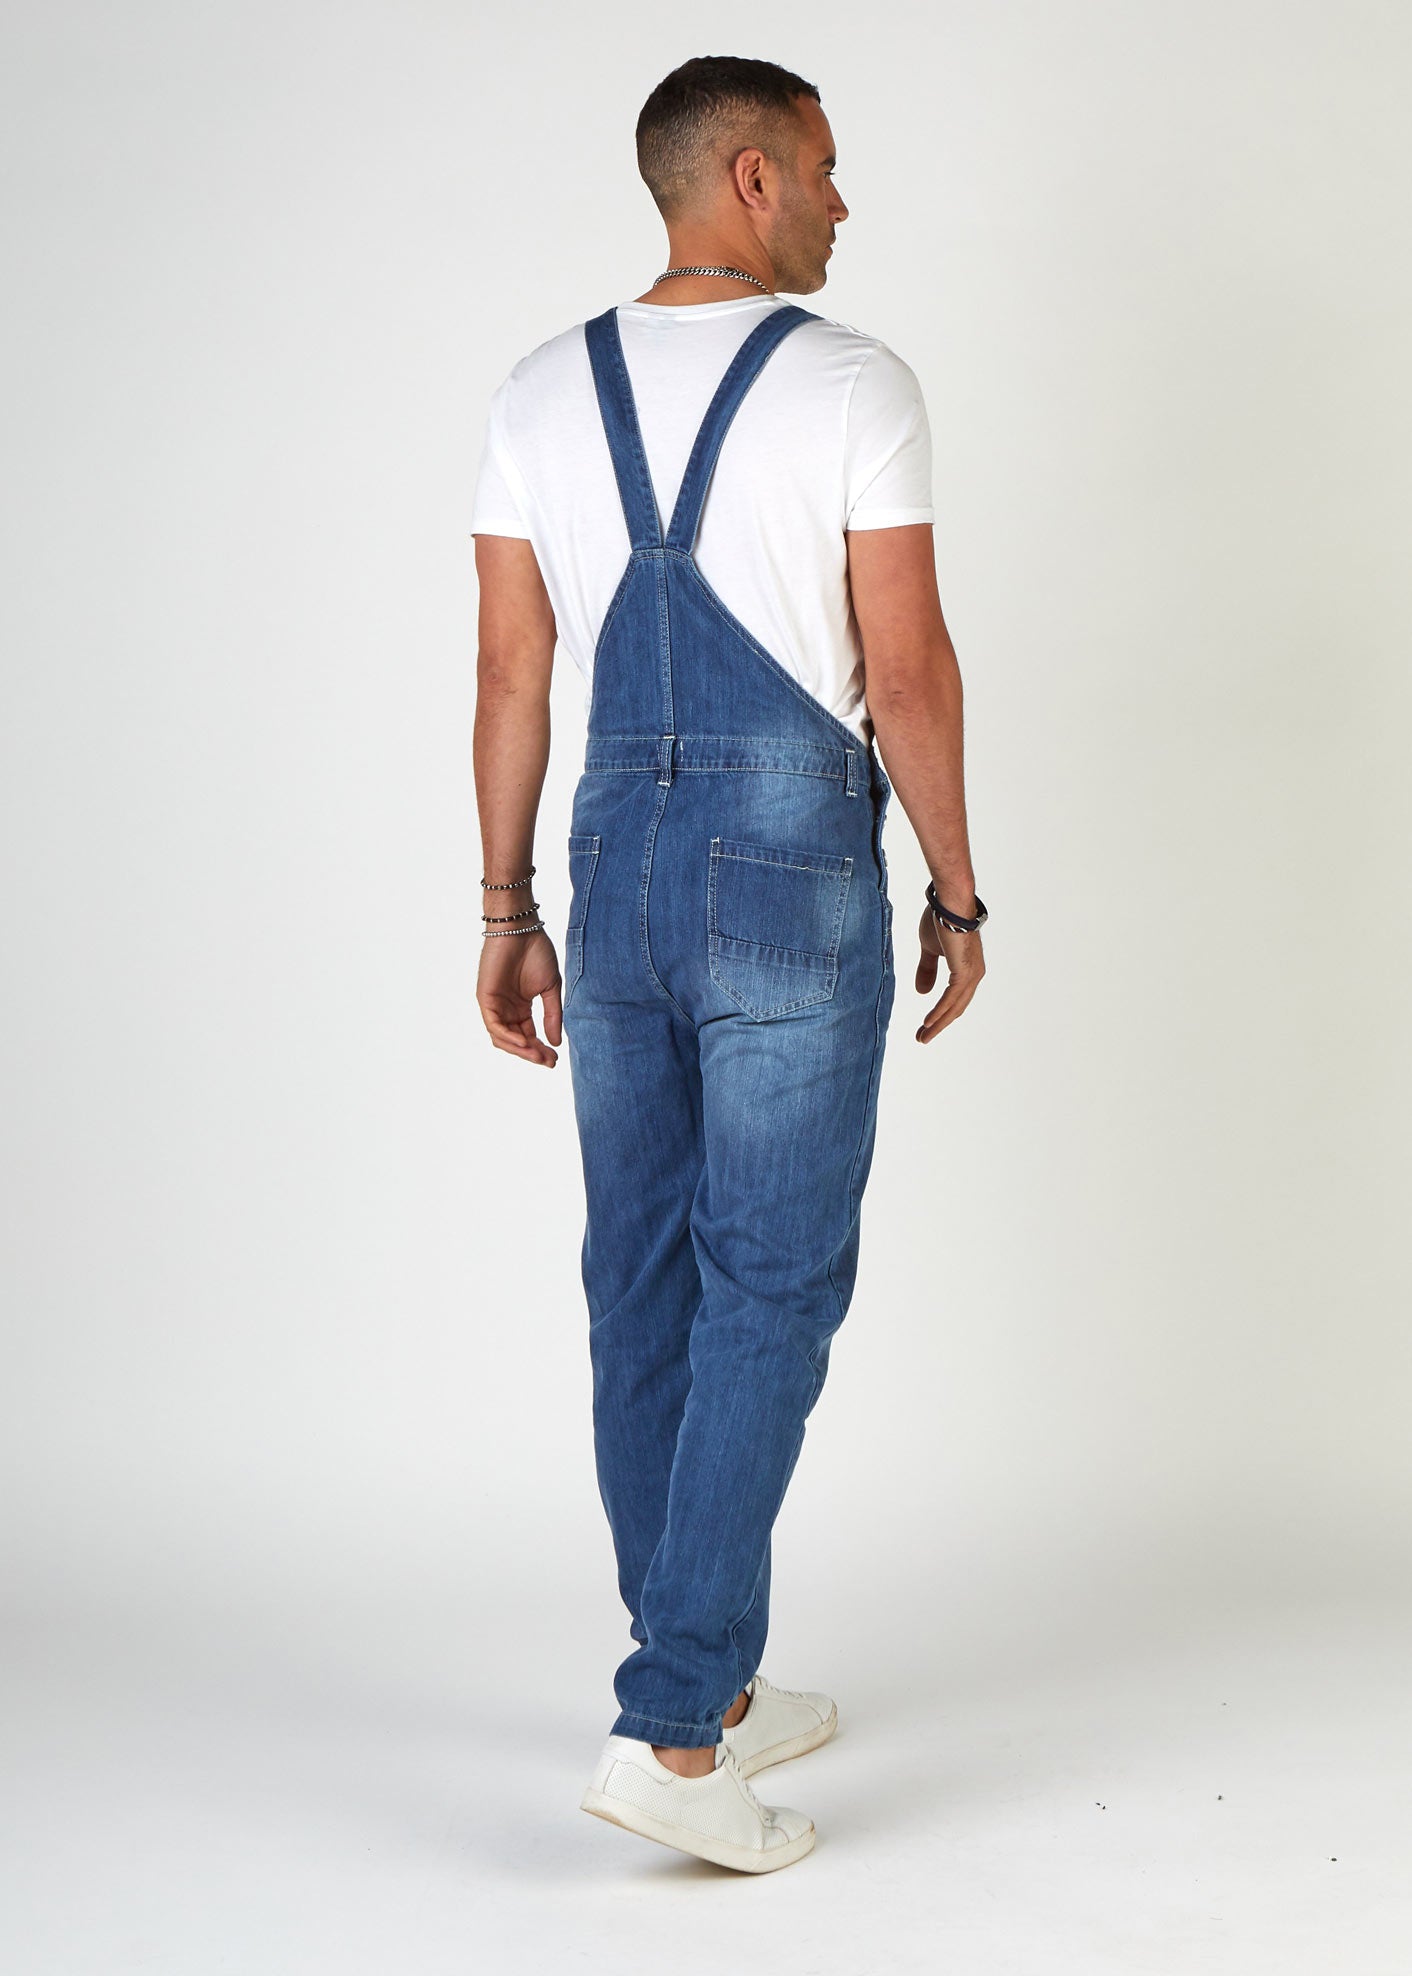 Rear full-length pose looking right, wearing Bertie-style, denim bib overalls with view of back straps and pockets.